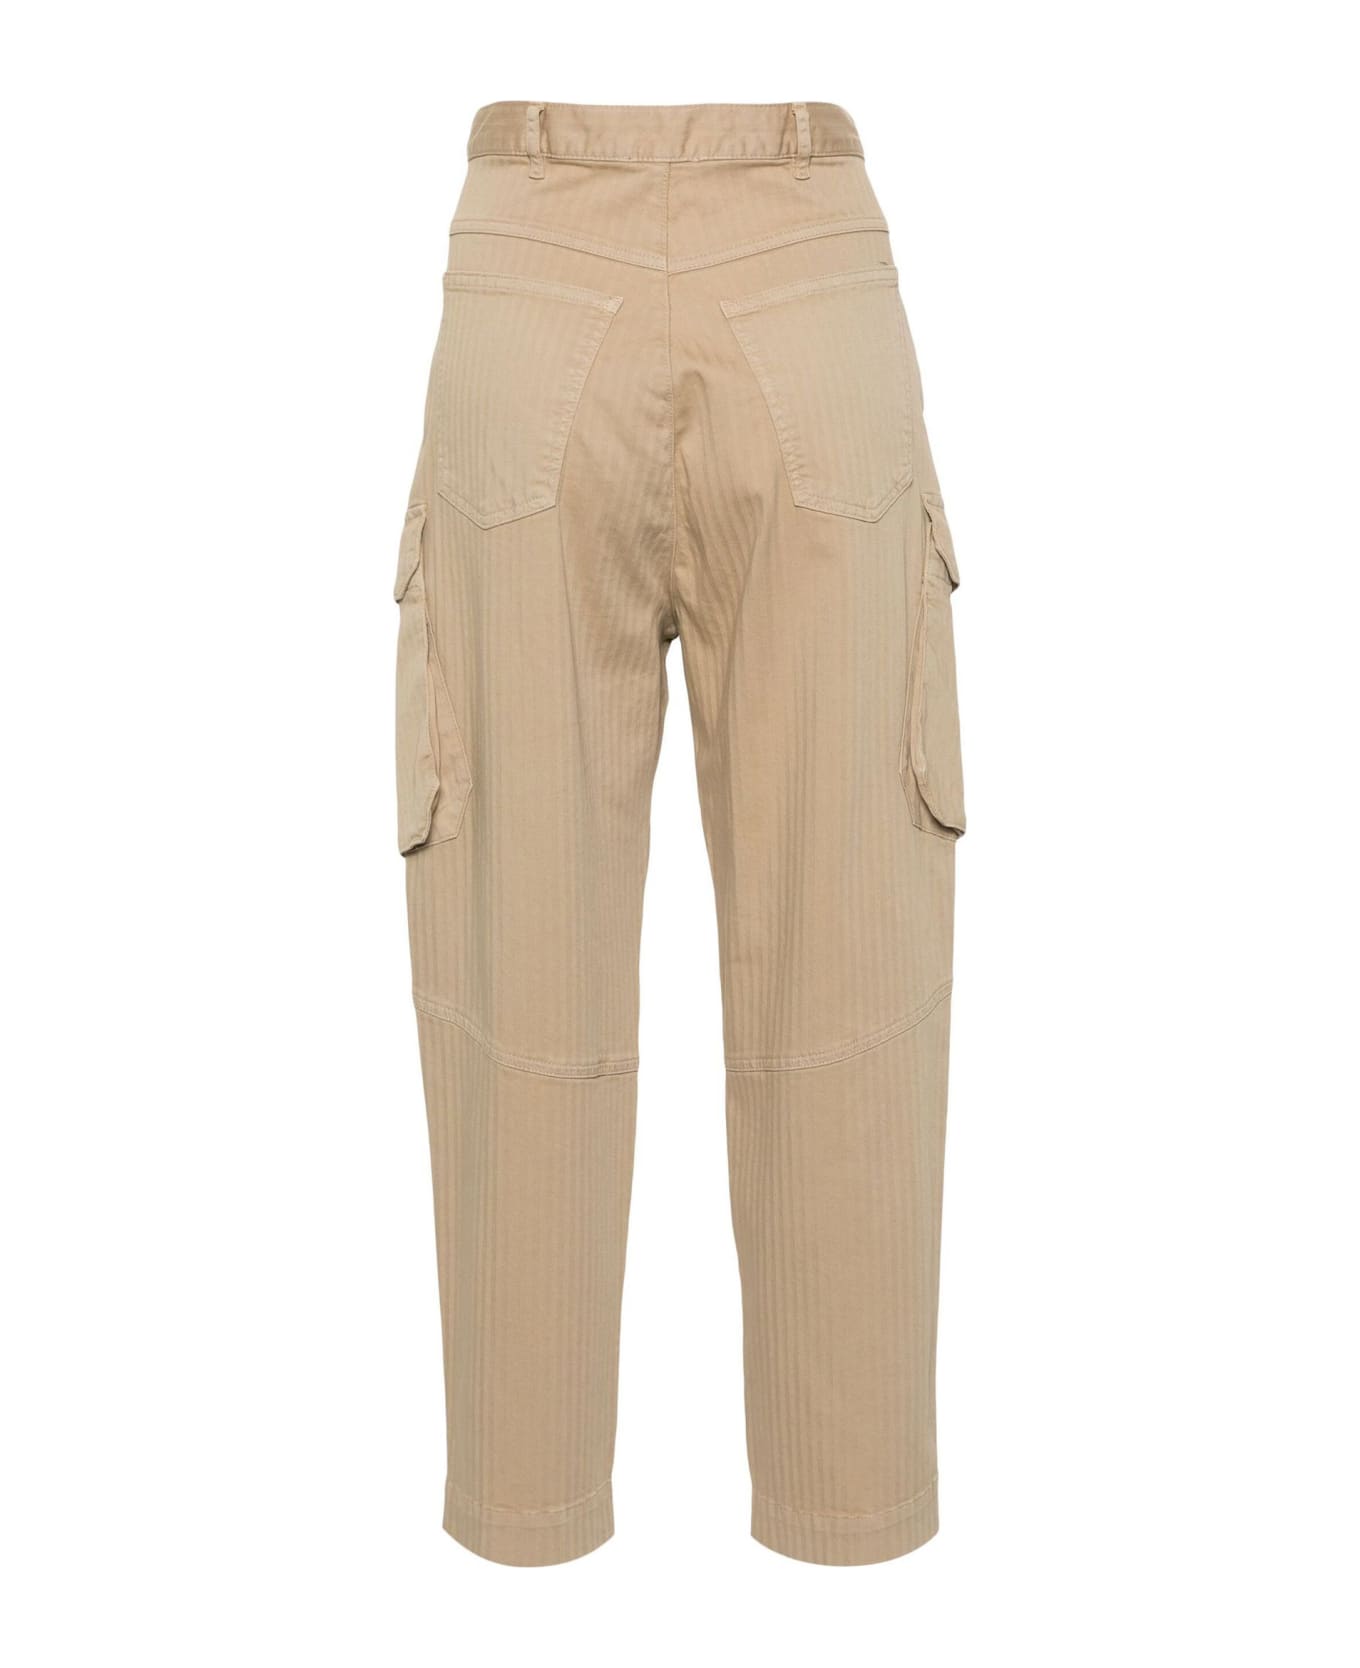 SEMICOUTURE Sand Beige Cotton Blend Trousers - Beige ボトムス